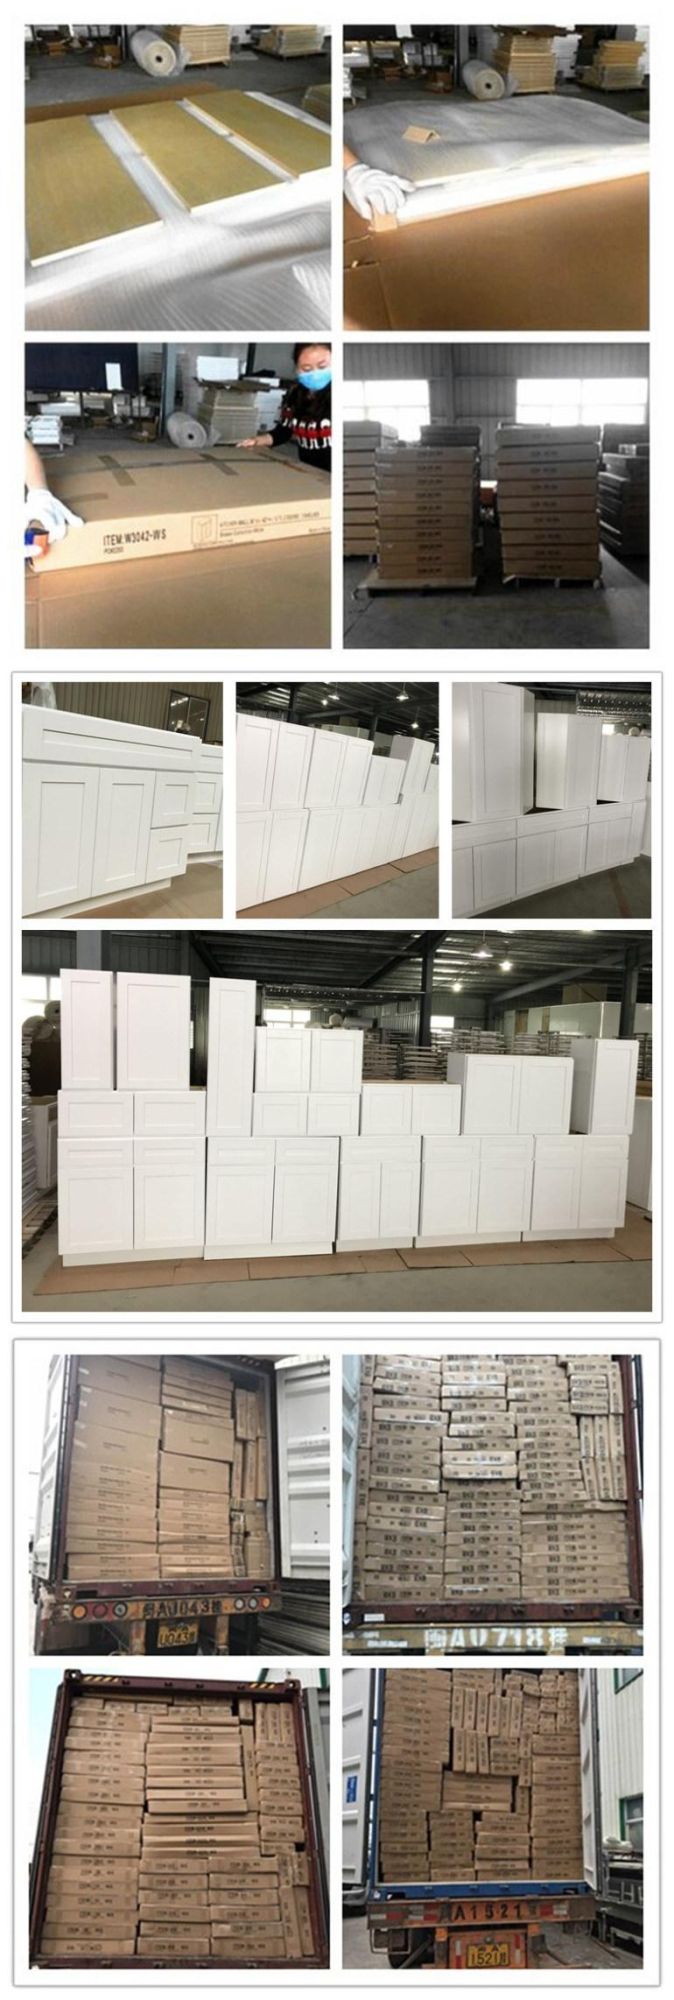 Factory Price Kitchen Cabinet with Custom Designs